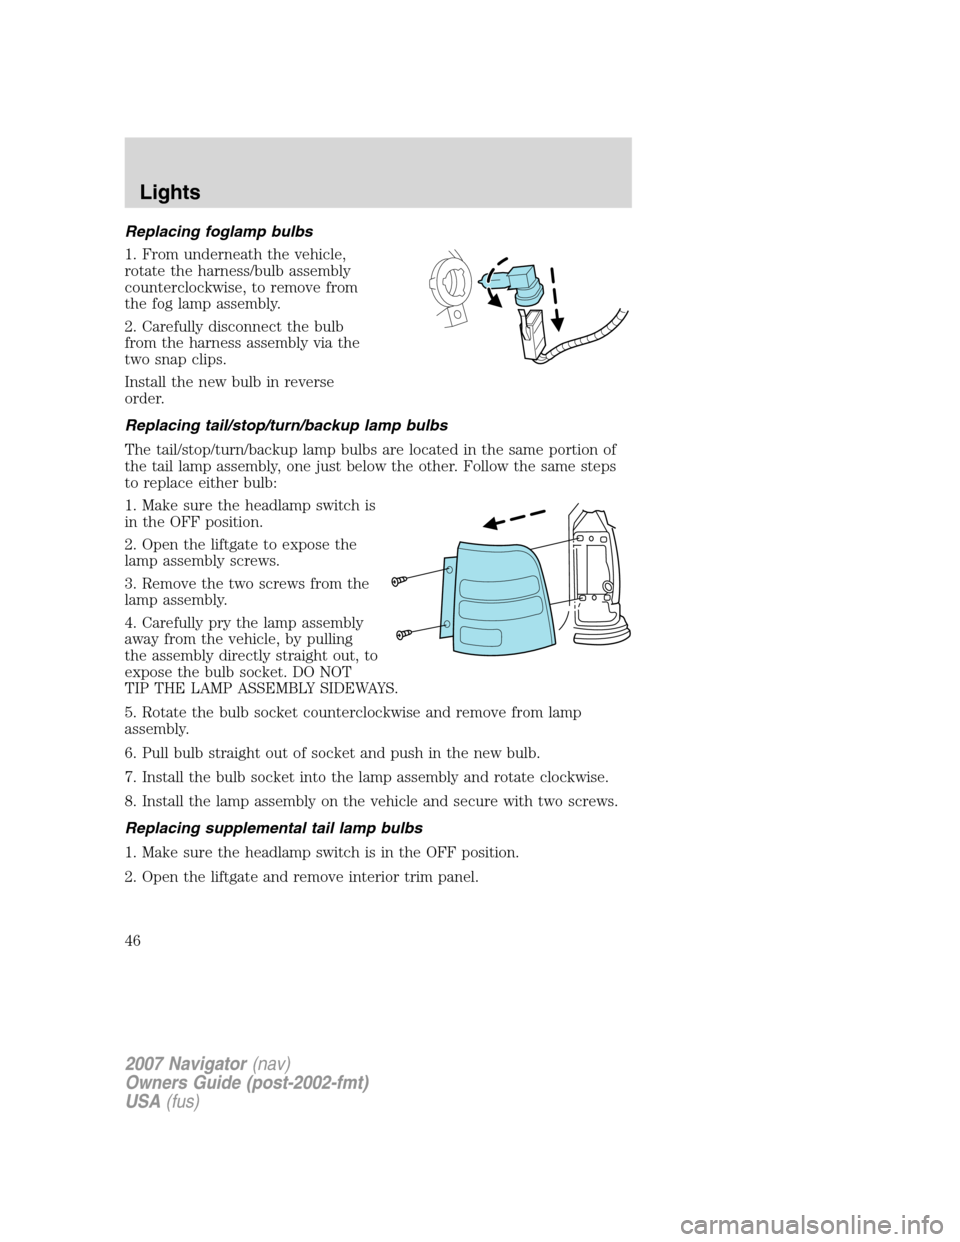 LINCOLN NAVIGATOR 2007  Owners Manual Replacing foglamp bulbs
1. From underneath the vehicle,
rotate the harness/bulb assembly
counterclockwise, to remove from
the fog lamp assembly.
2. Carefully disconnect the bulb
from the harness assem